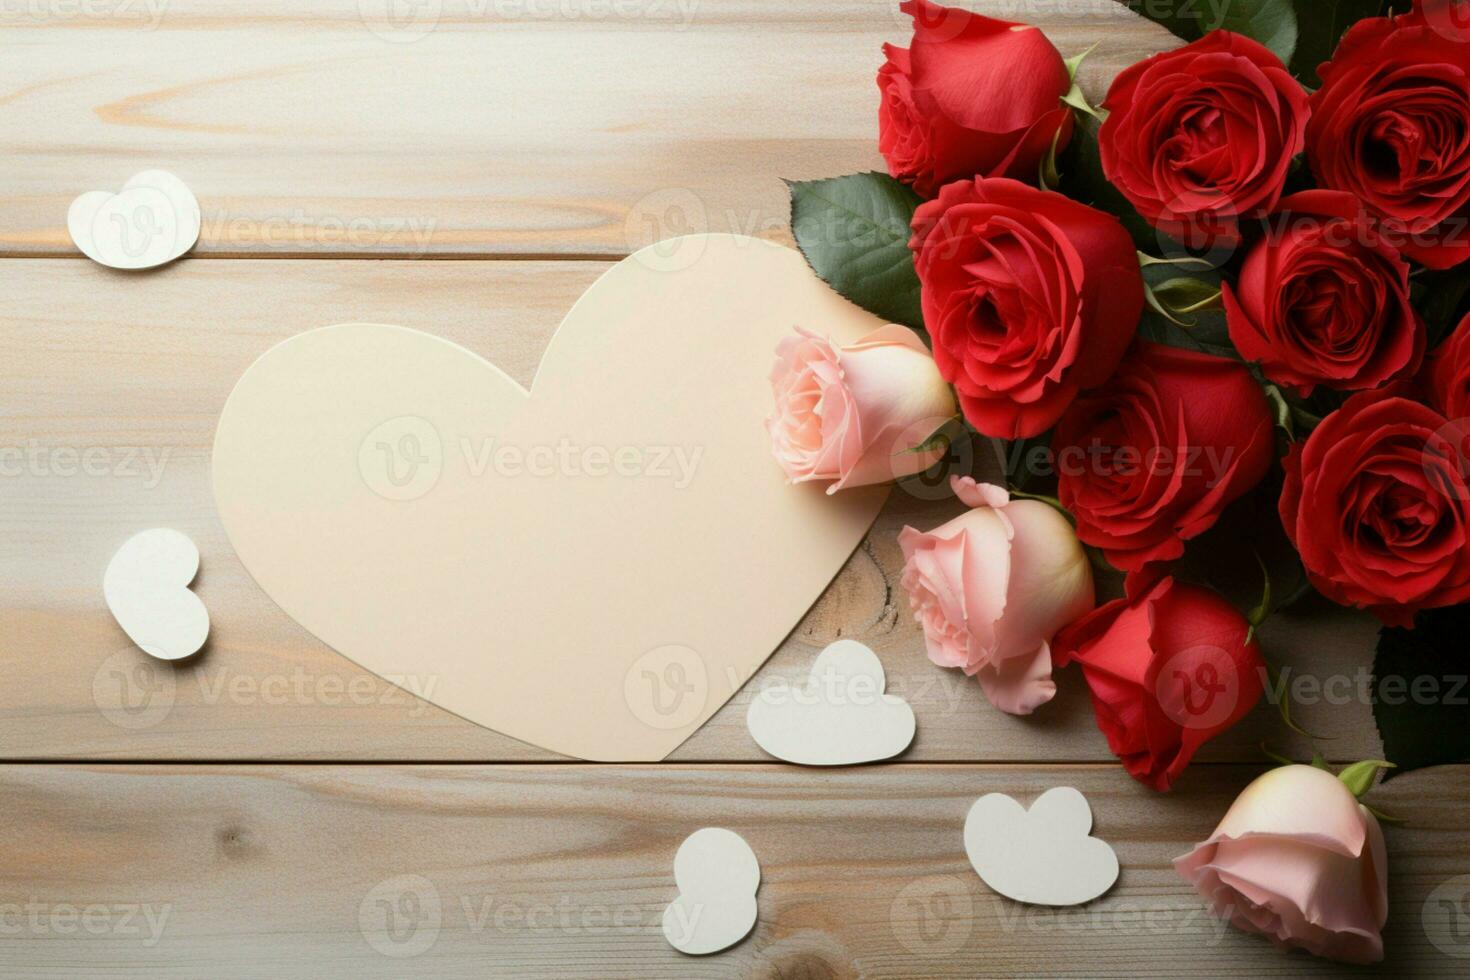 Greeting concept with roses, heart shapes, and a blank card on a wooden table AI Generated photo